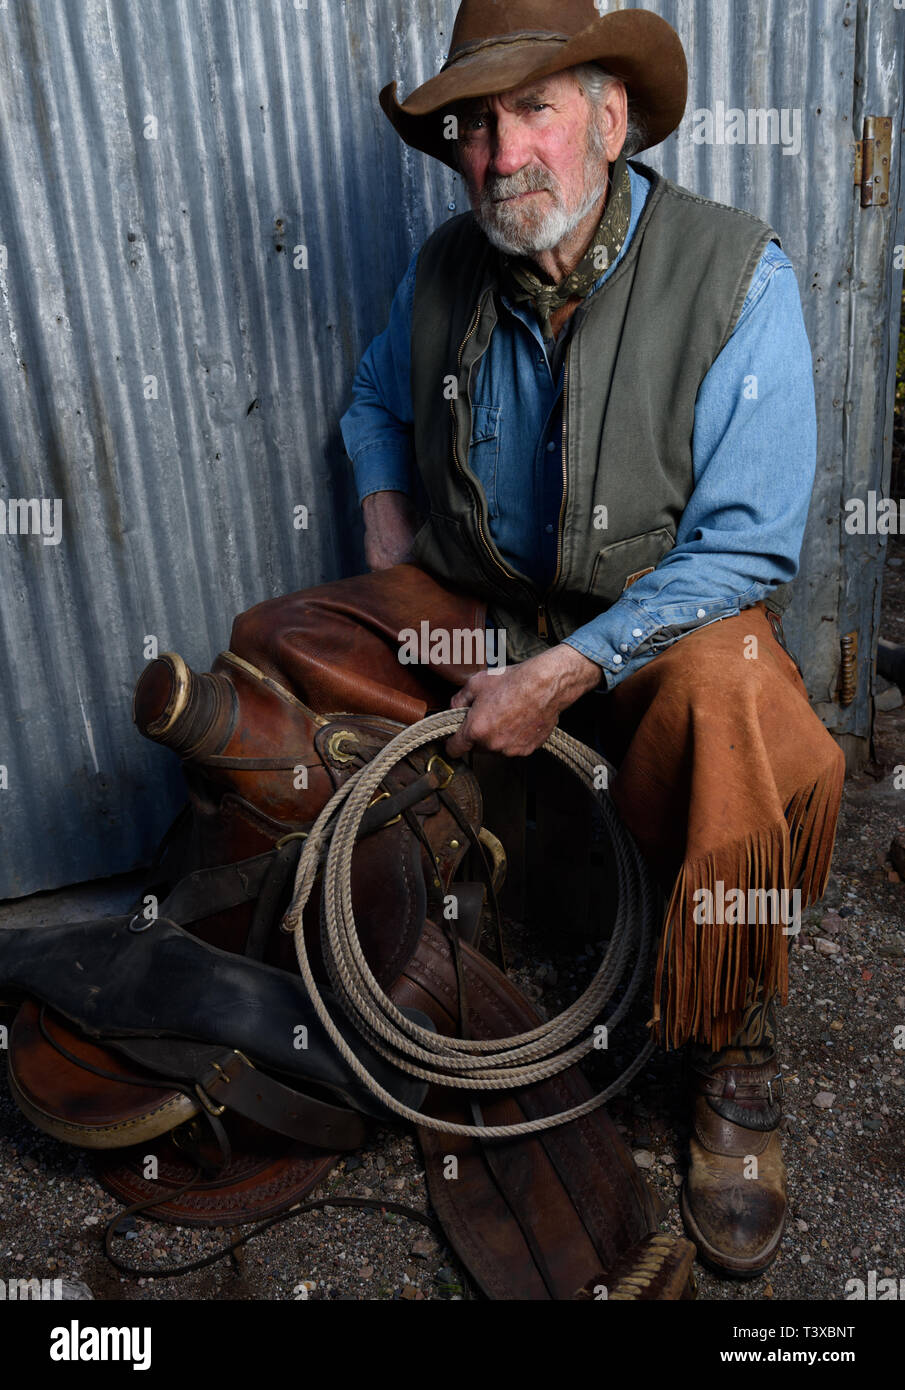 Old cowboy with gray beard wears leather hat, leather chaps, and holds a lasso and is sitting with a leather saddle. Stock Photo